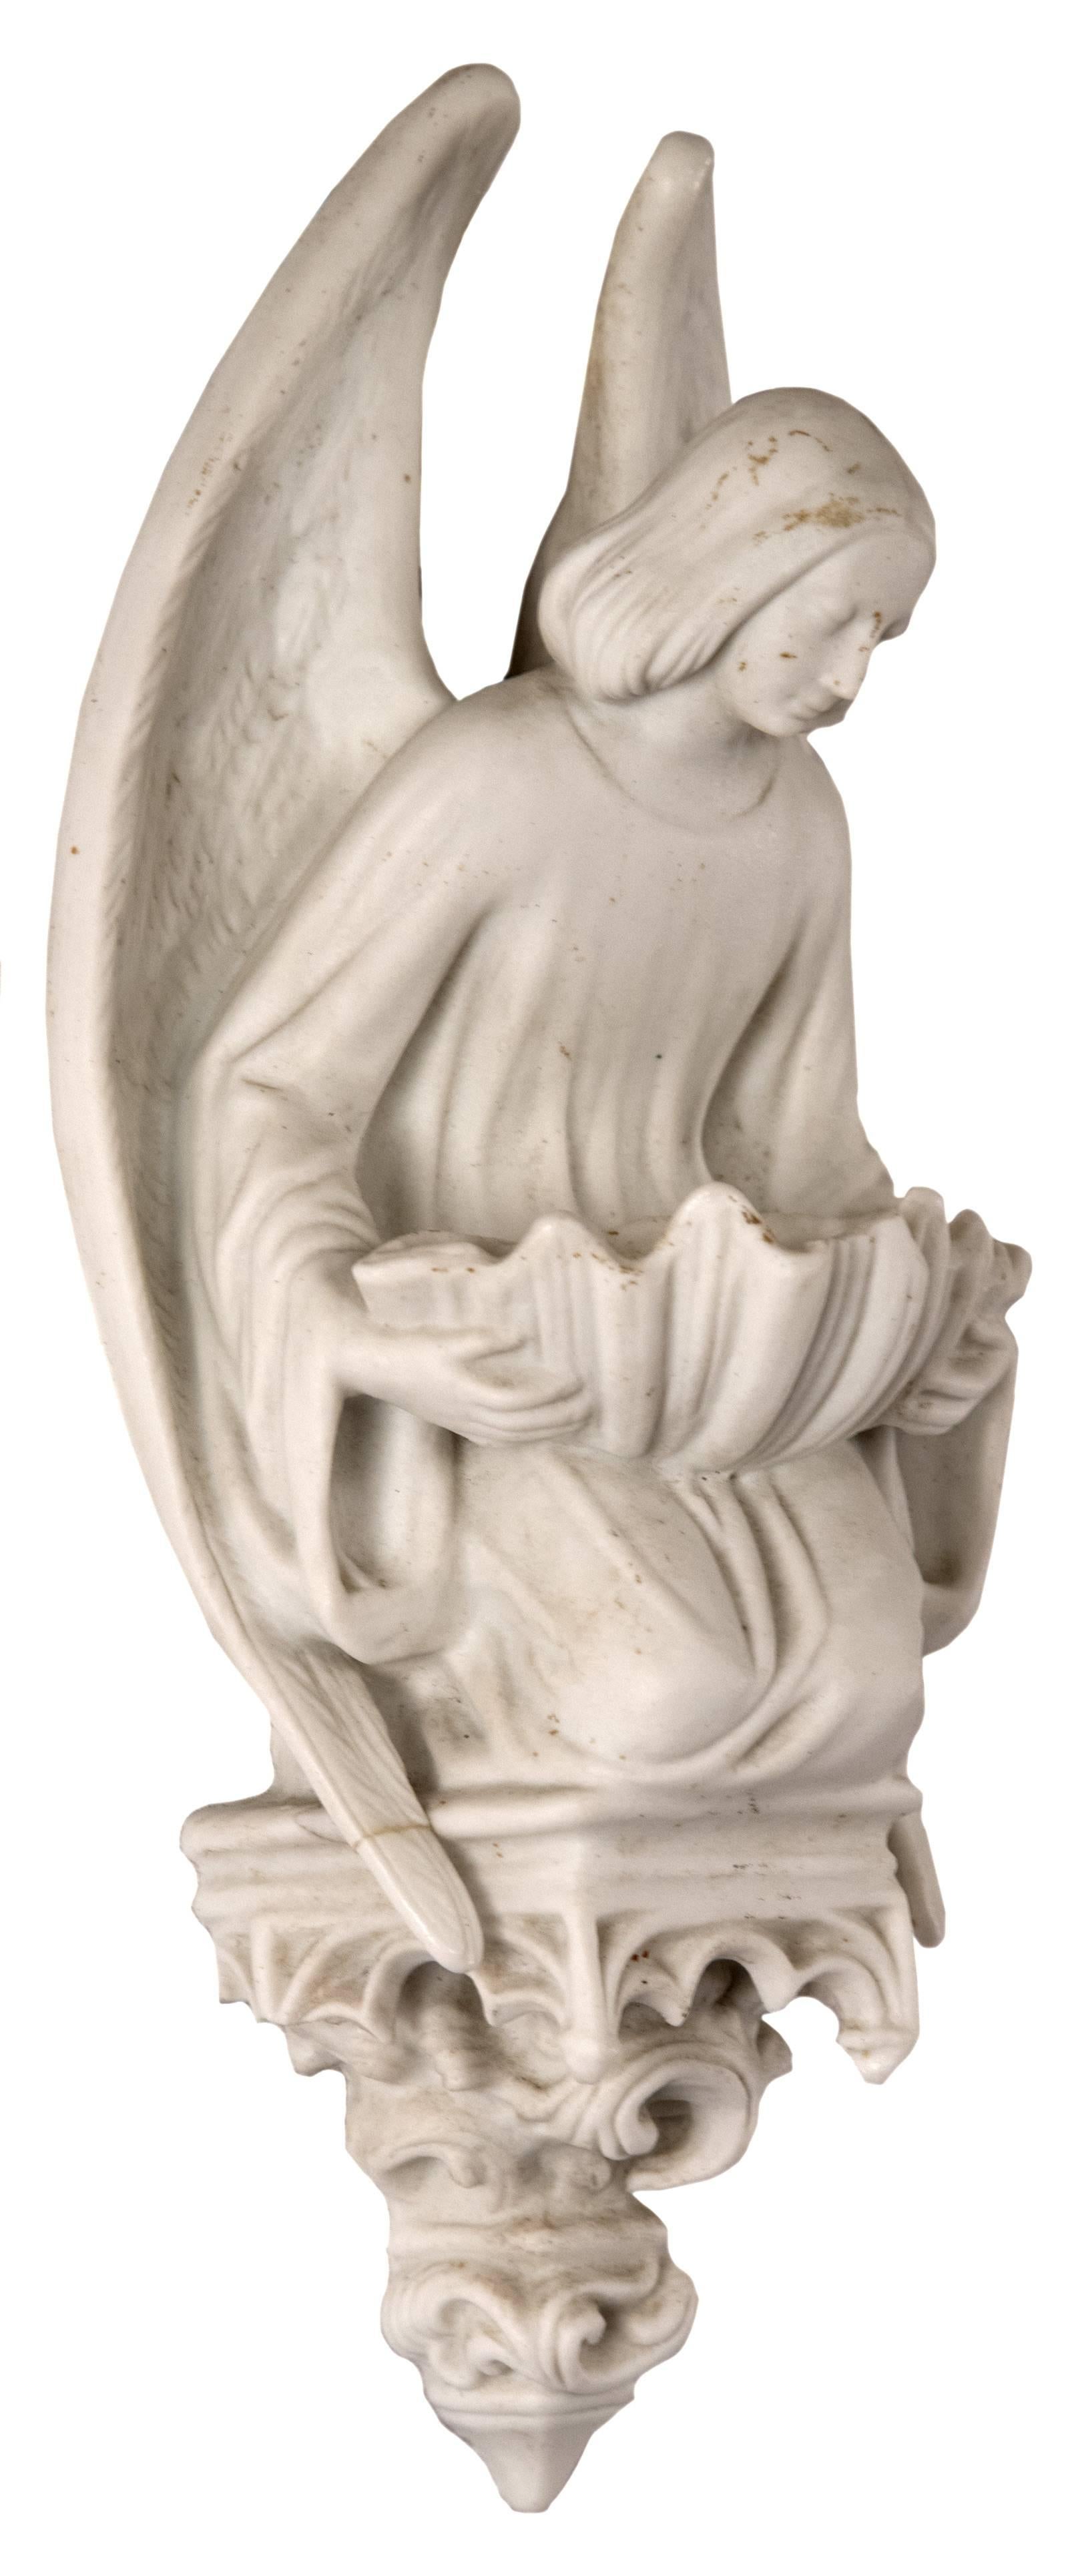 Kneeling on a dais, with wings encompassing their body, an angel with bowed head looks toward a shell-shaped font that they hold resting upon their lap. It is sculpted to denote the texture of the wings, the gentle folds of the drapery, and the